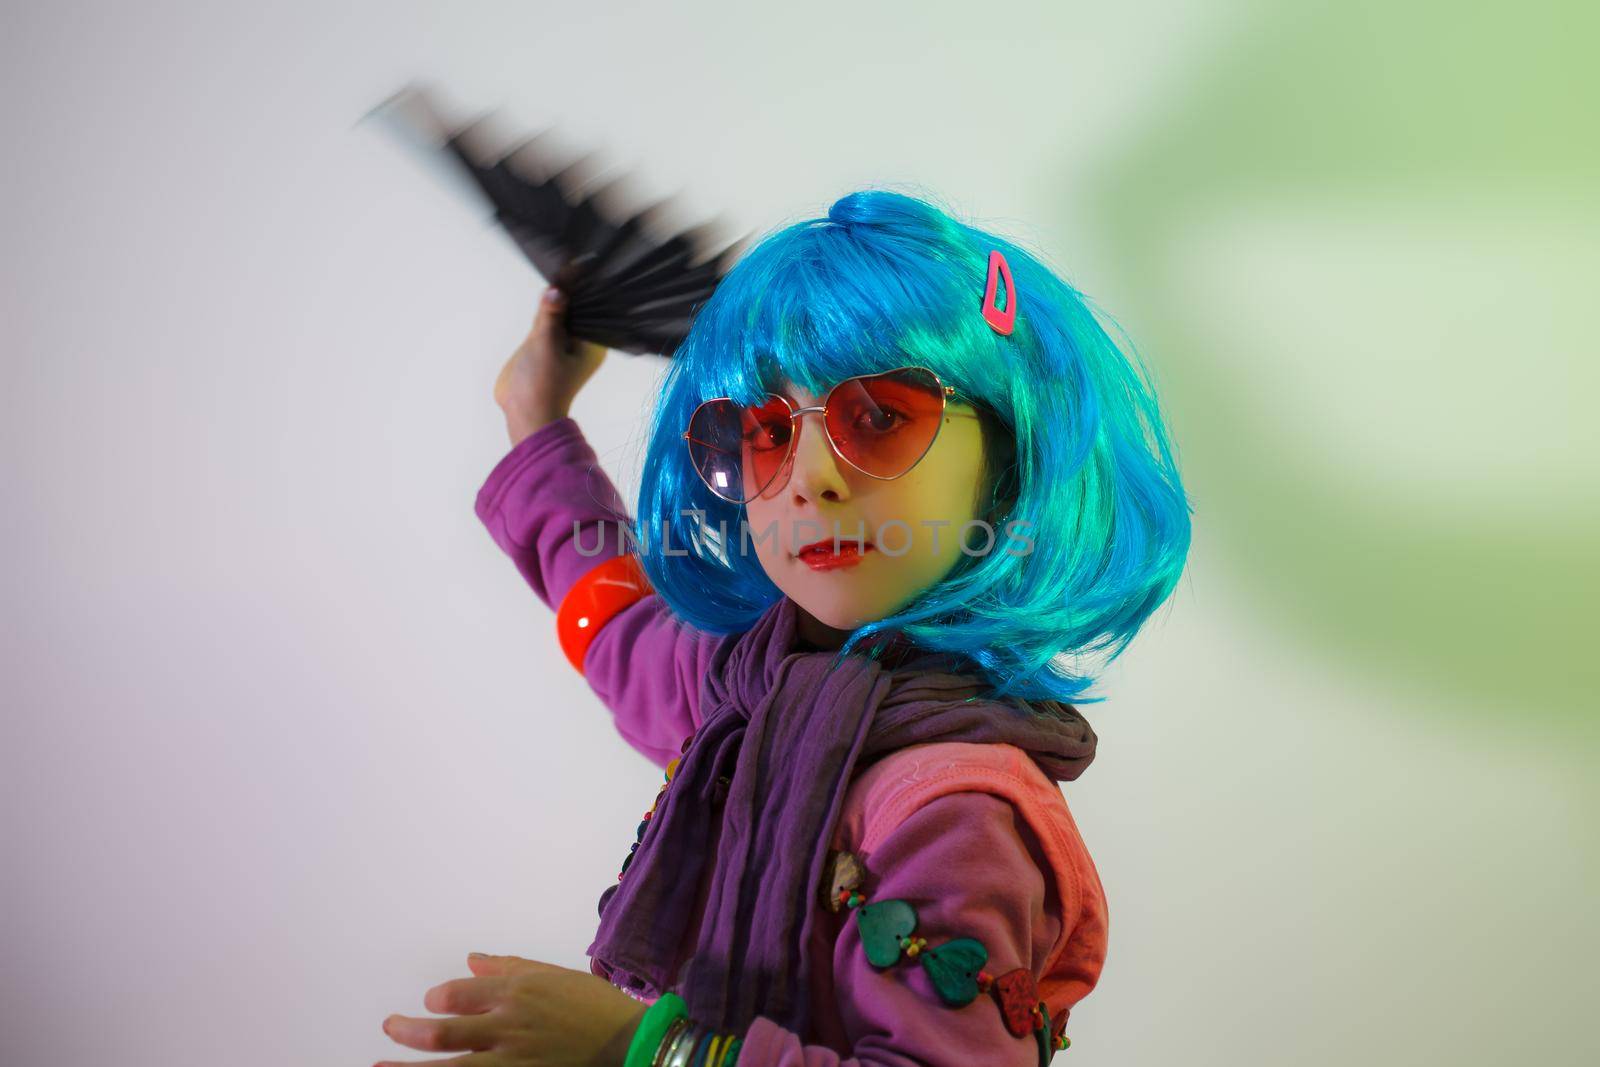 Child with blue wig posing with a fan for a photo shoot